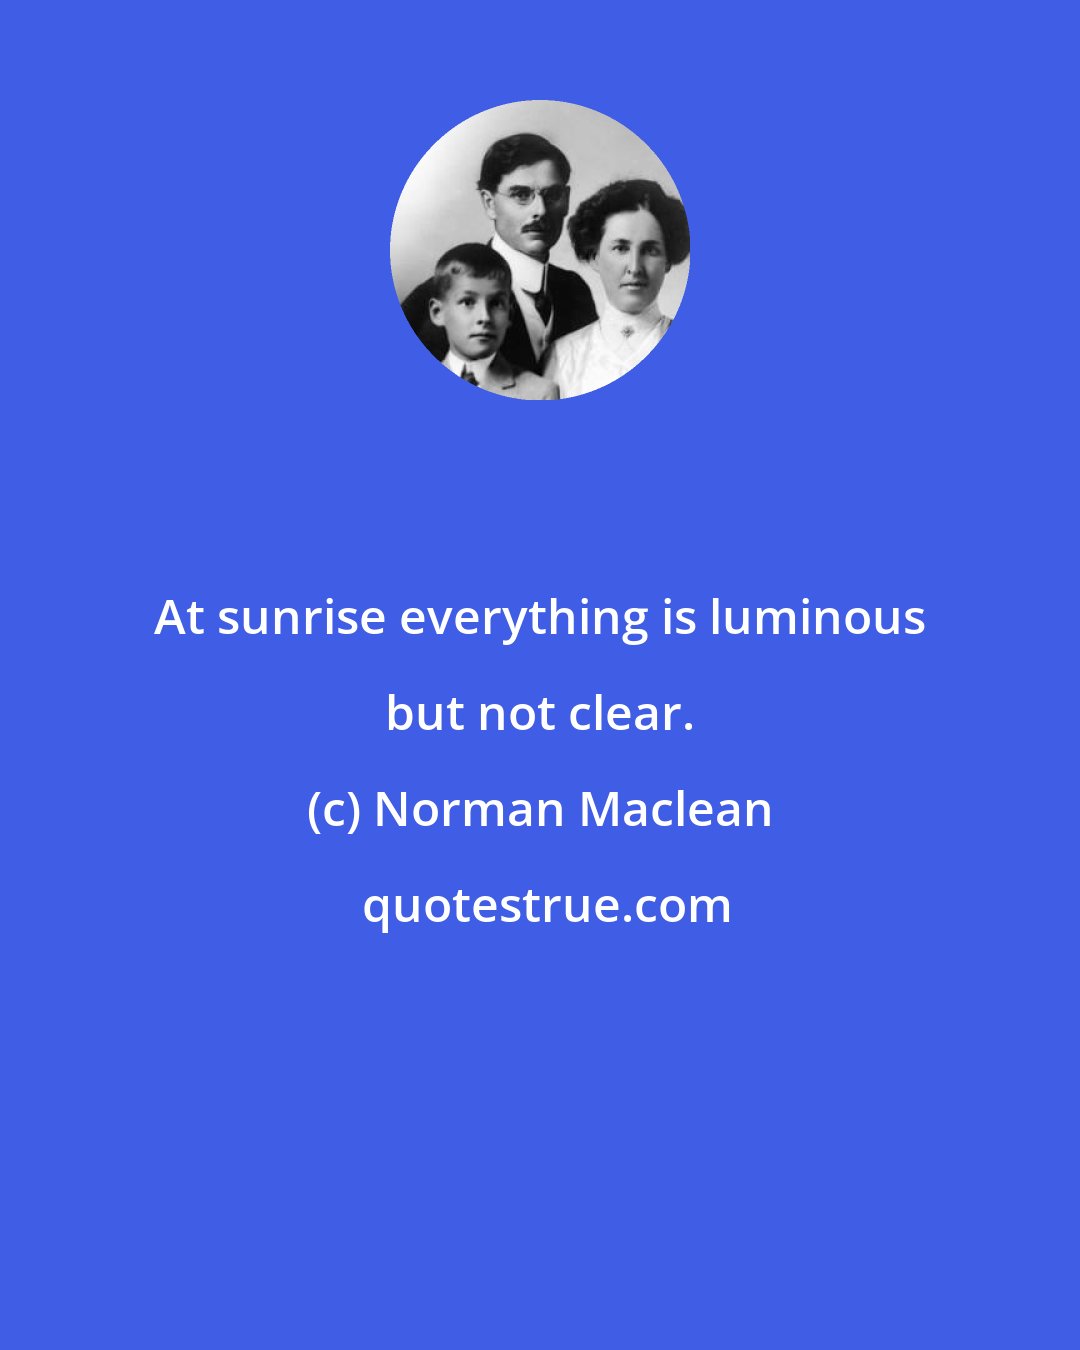 Norman Maclean: At sunrise everything is luminous but not clear.